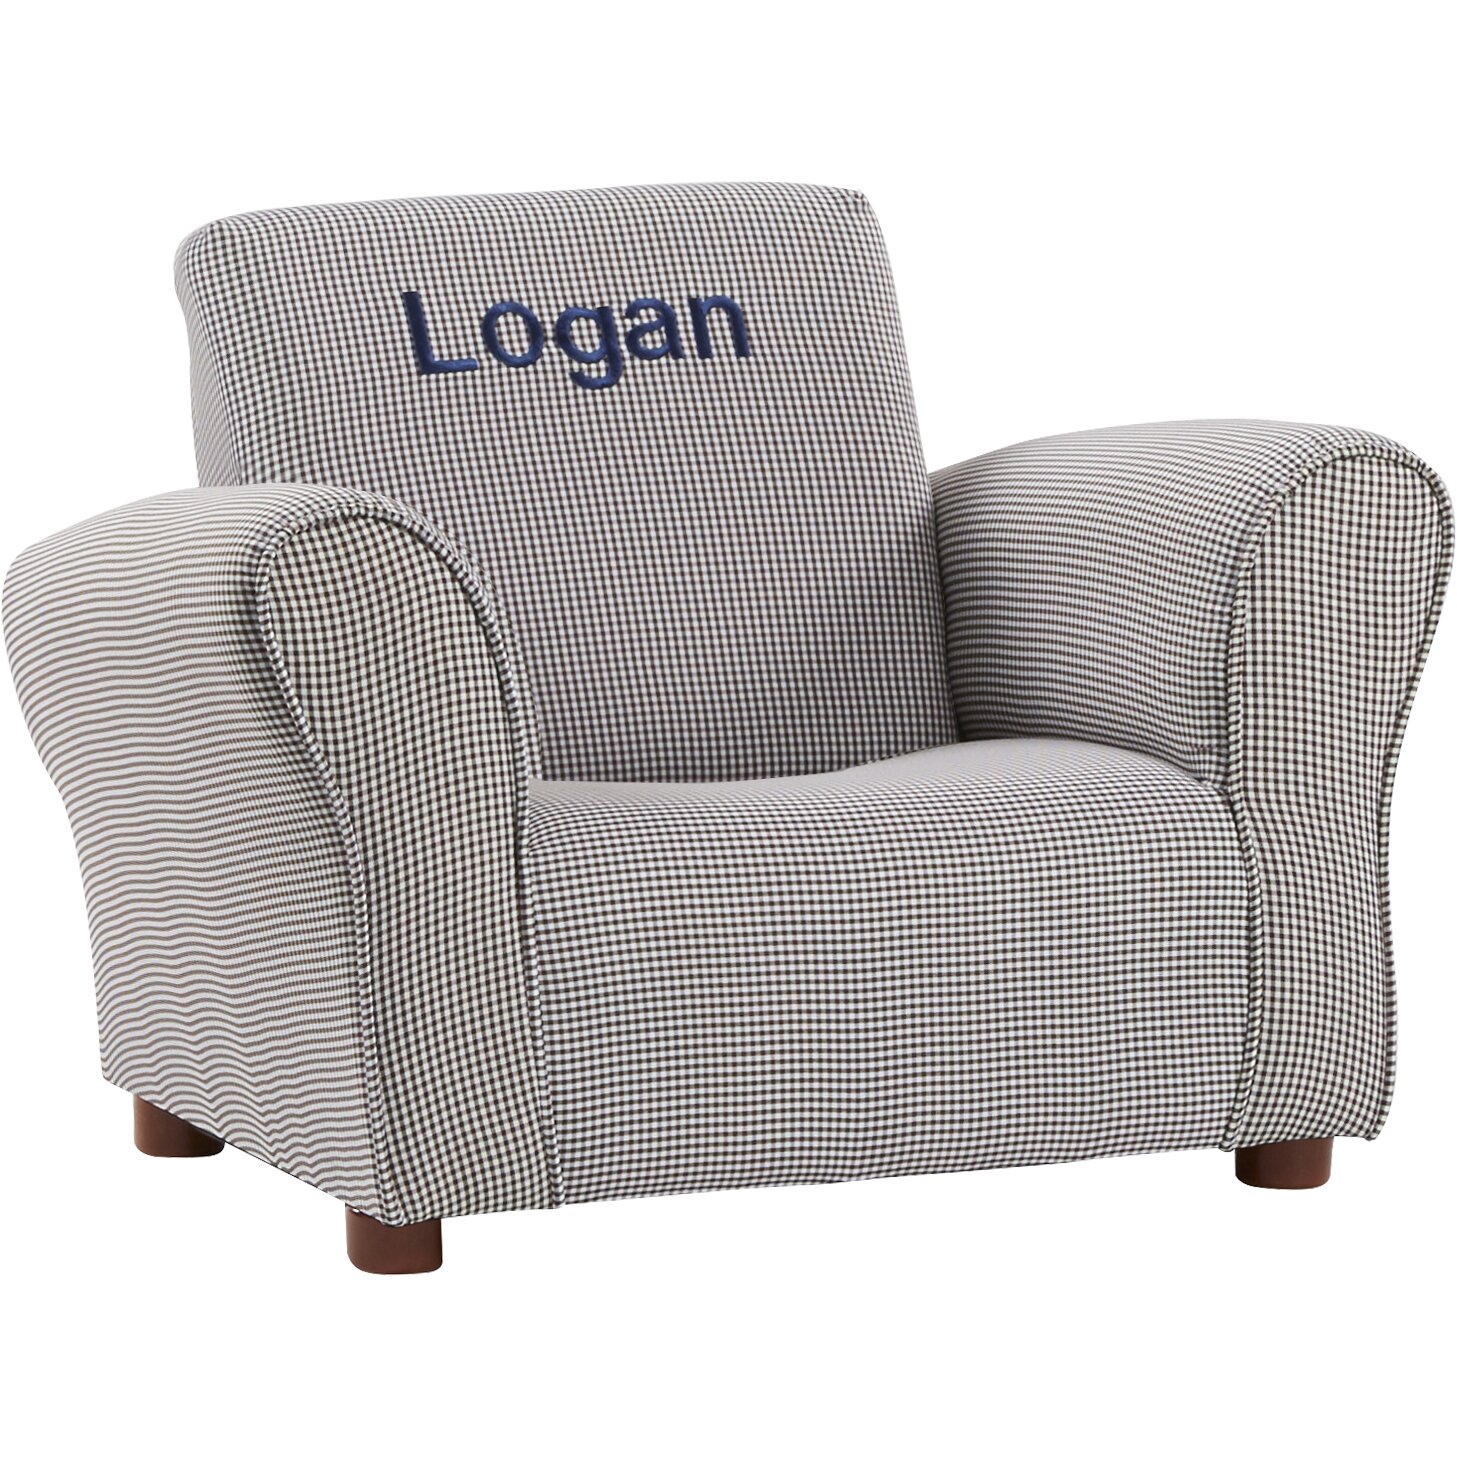 Fantasy Furniture Little Furniture Upholstered Personalized Kids Gingham Mini Chair 101 